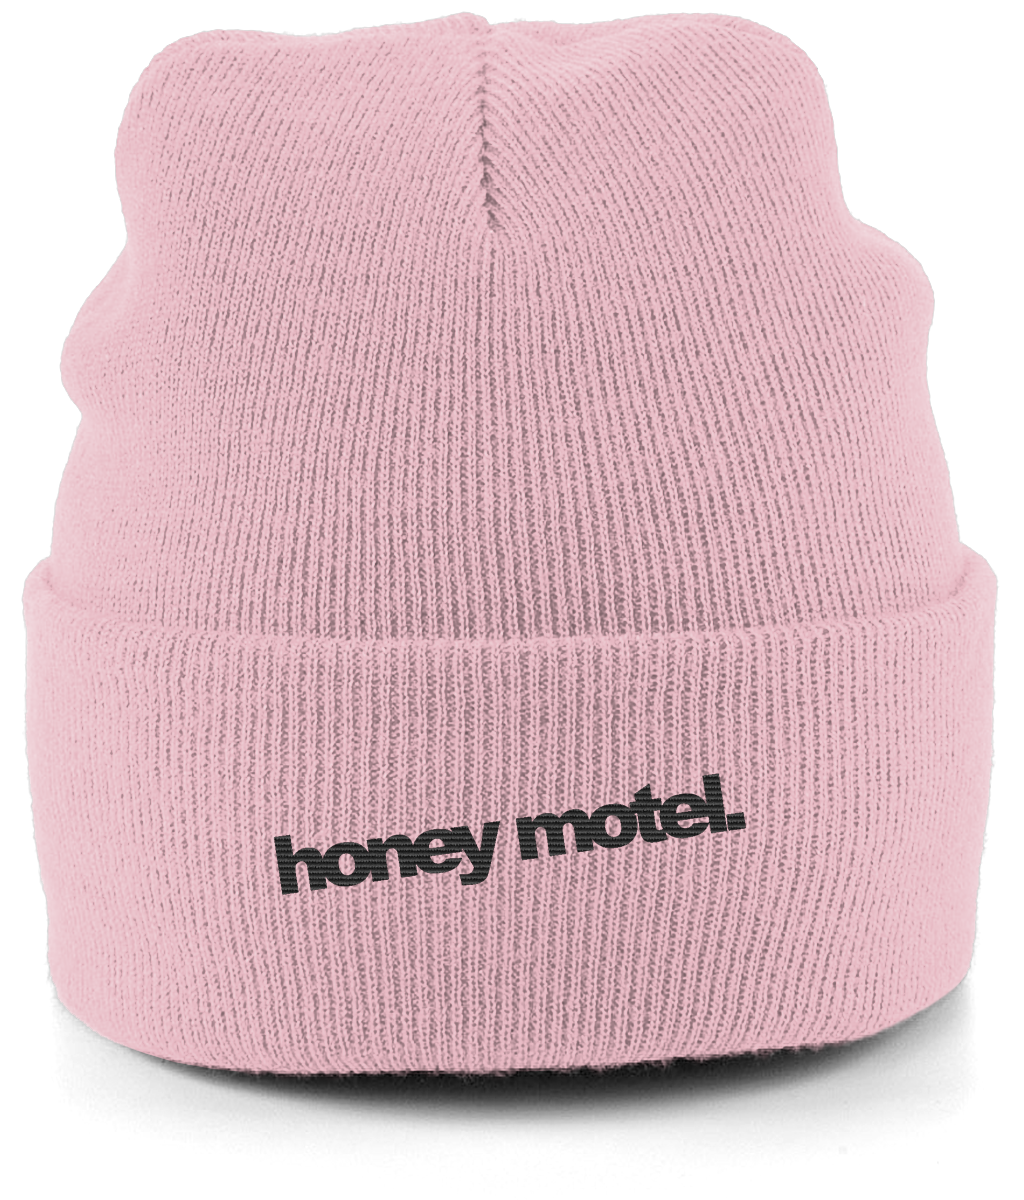 embroidered logo beanie - pink.